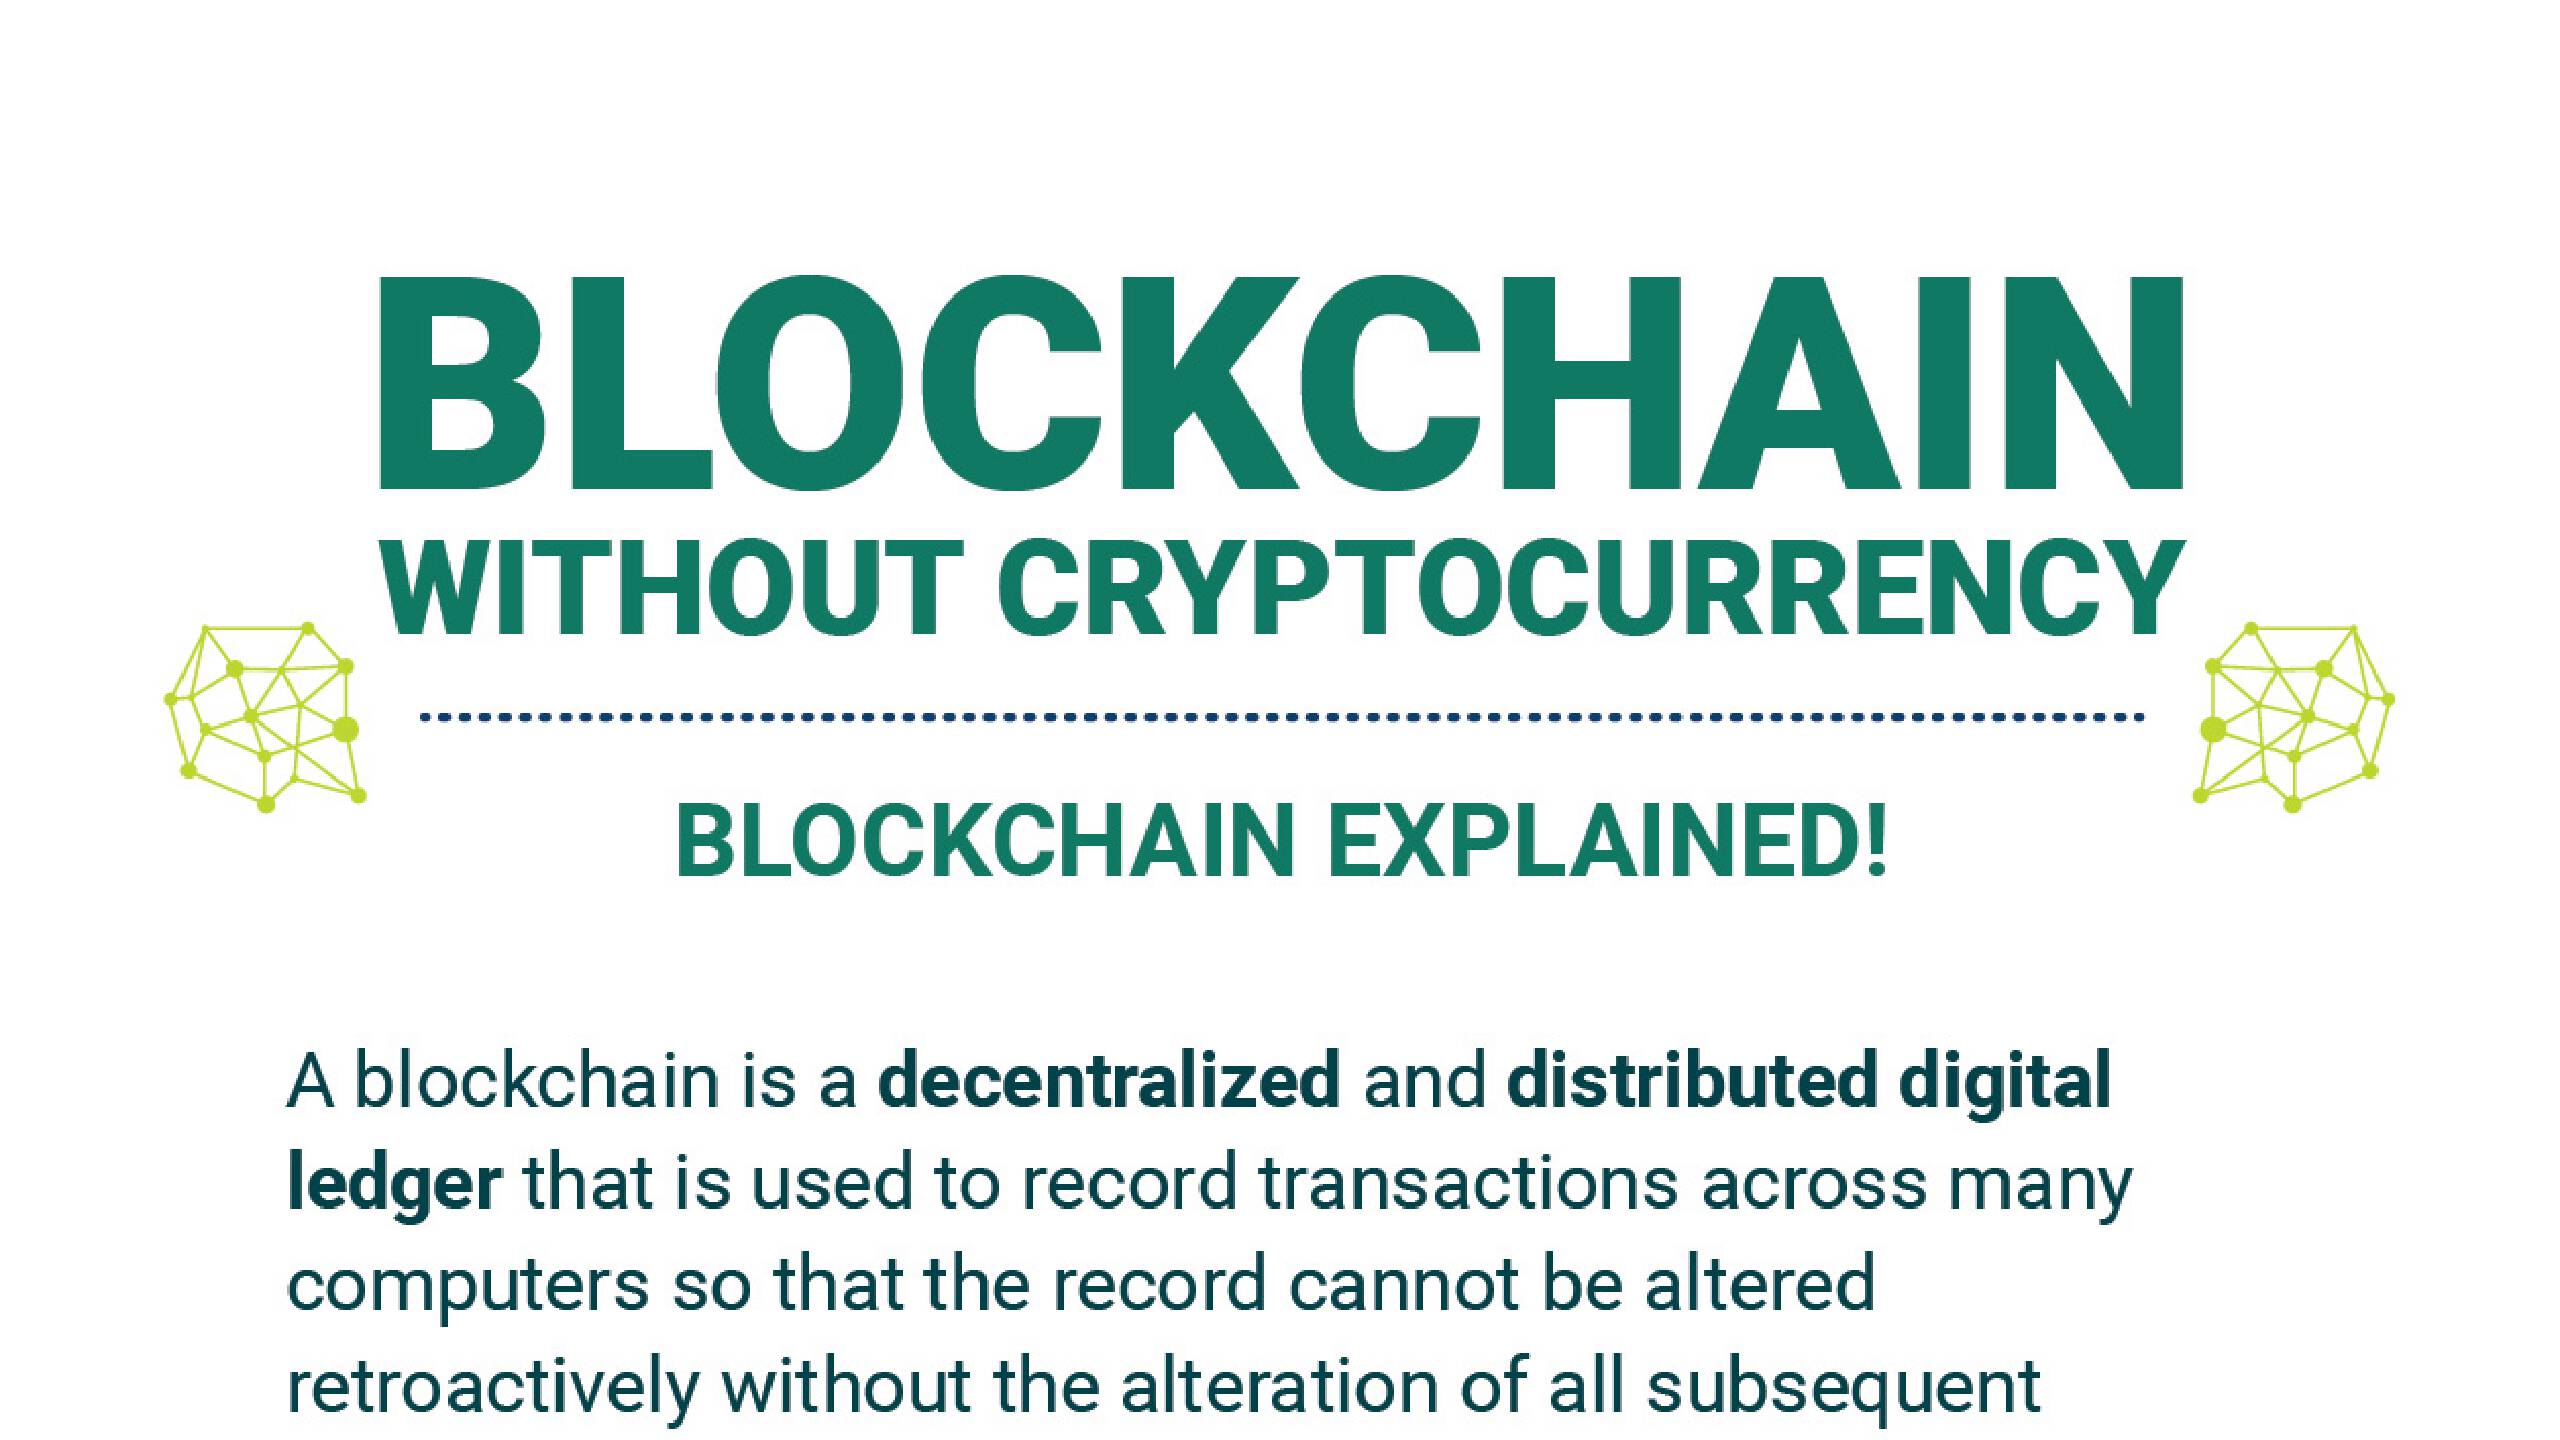 [Infographic] Blockchain without cryptocurrency